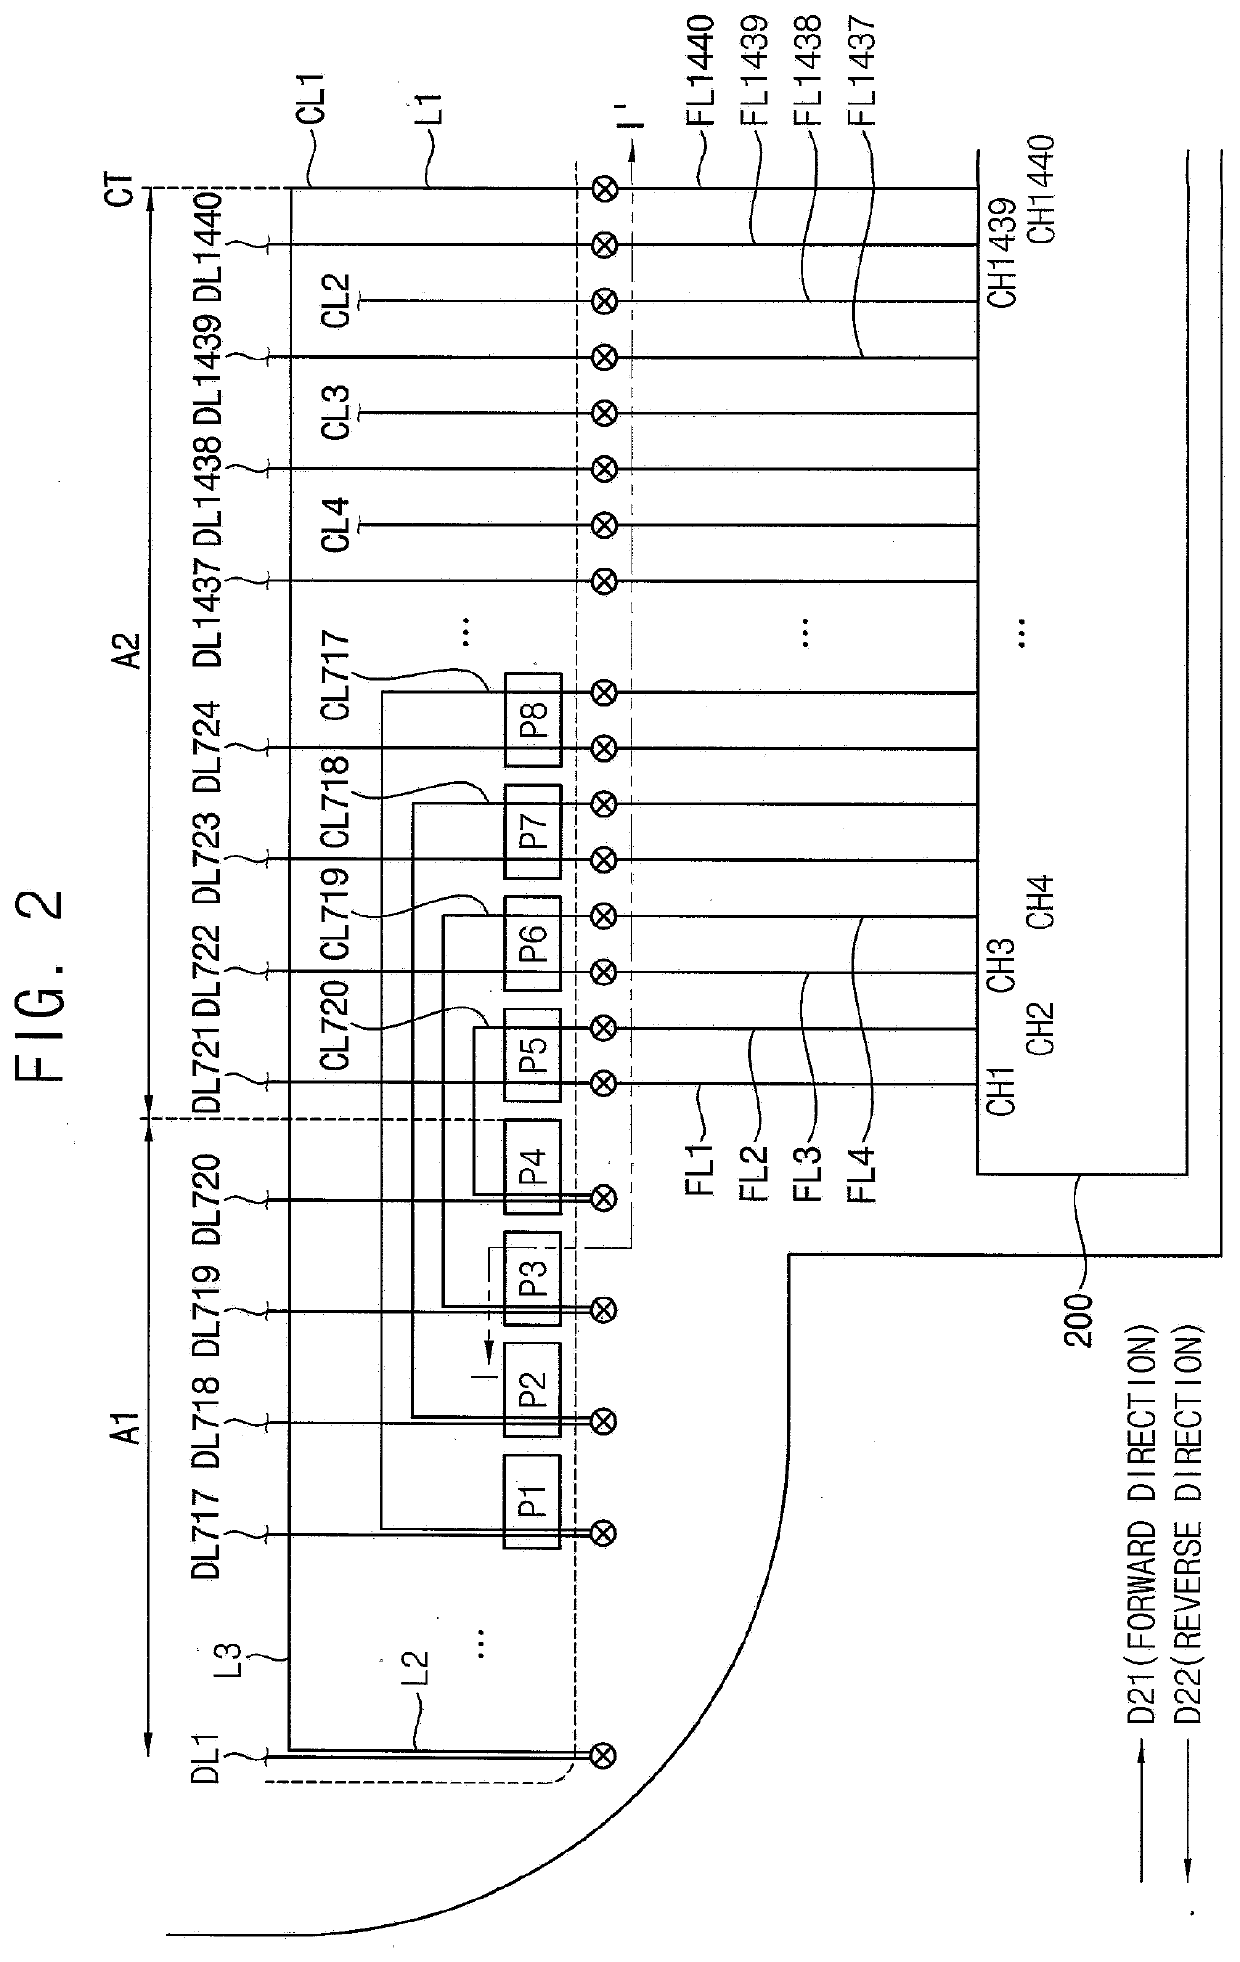 Display device having data lines in rounded edge and straight edge parts